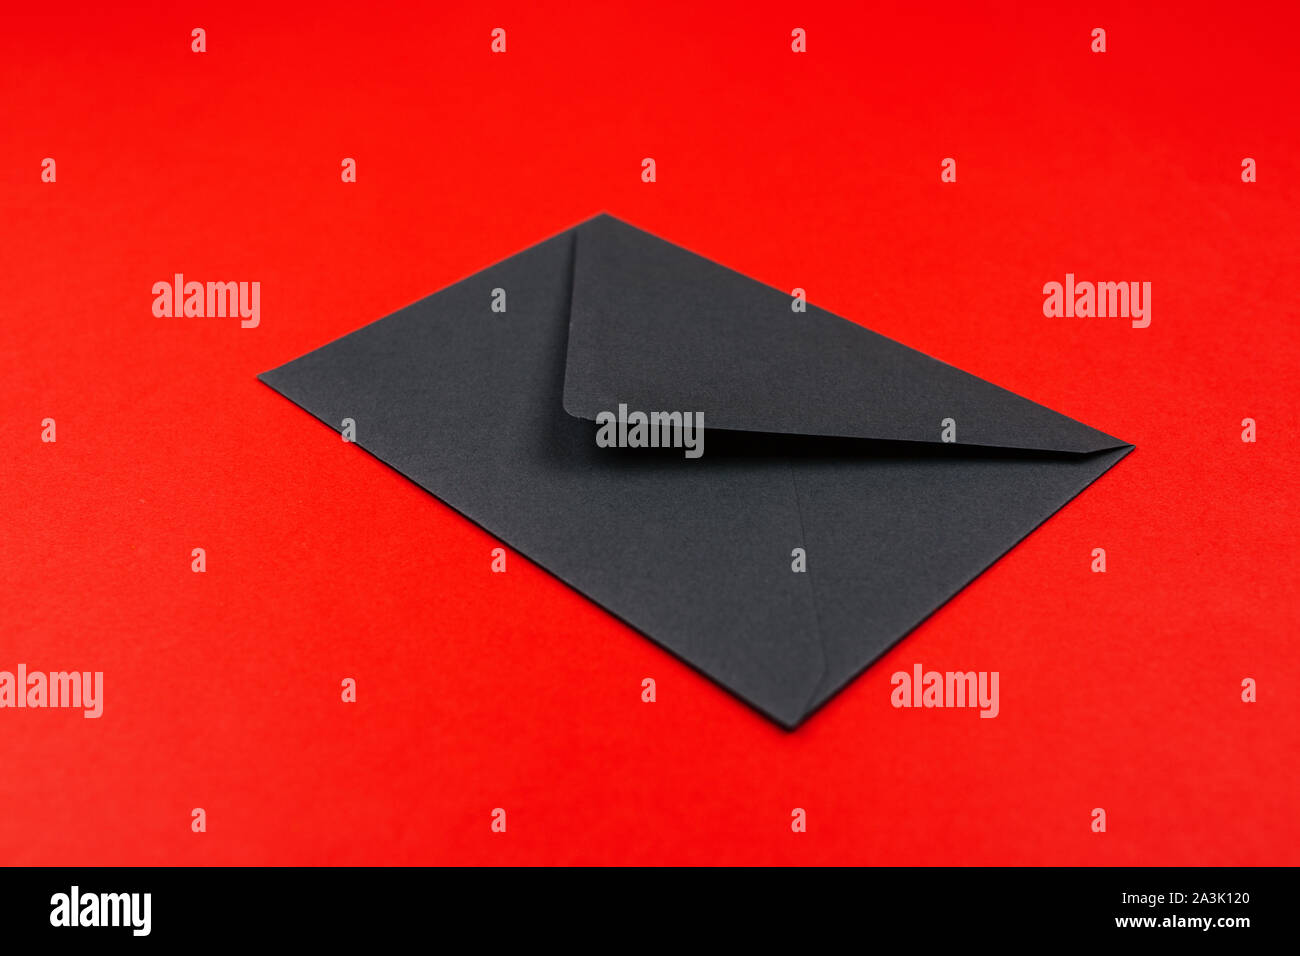 Junk mail or spam and fake letter idea. Concept for unsolicited mail or e-mail. Envelope on red background Stock Photo